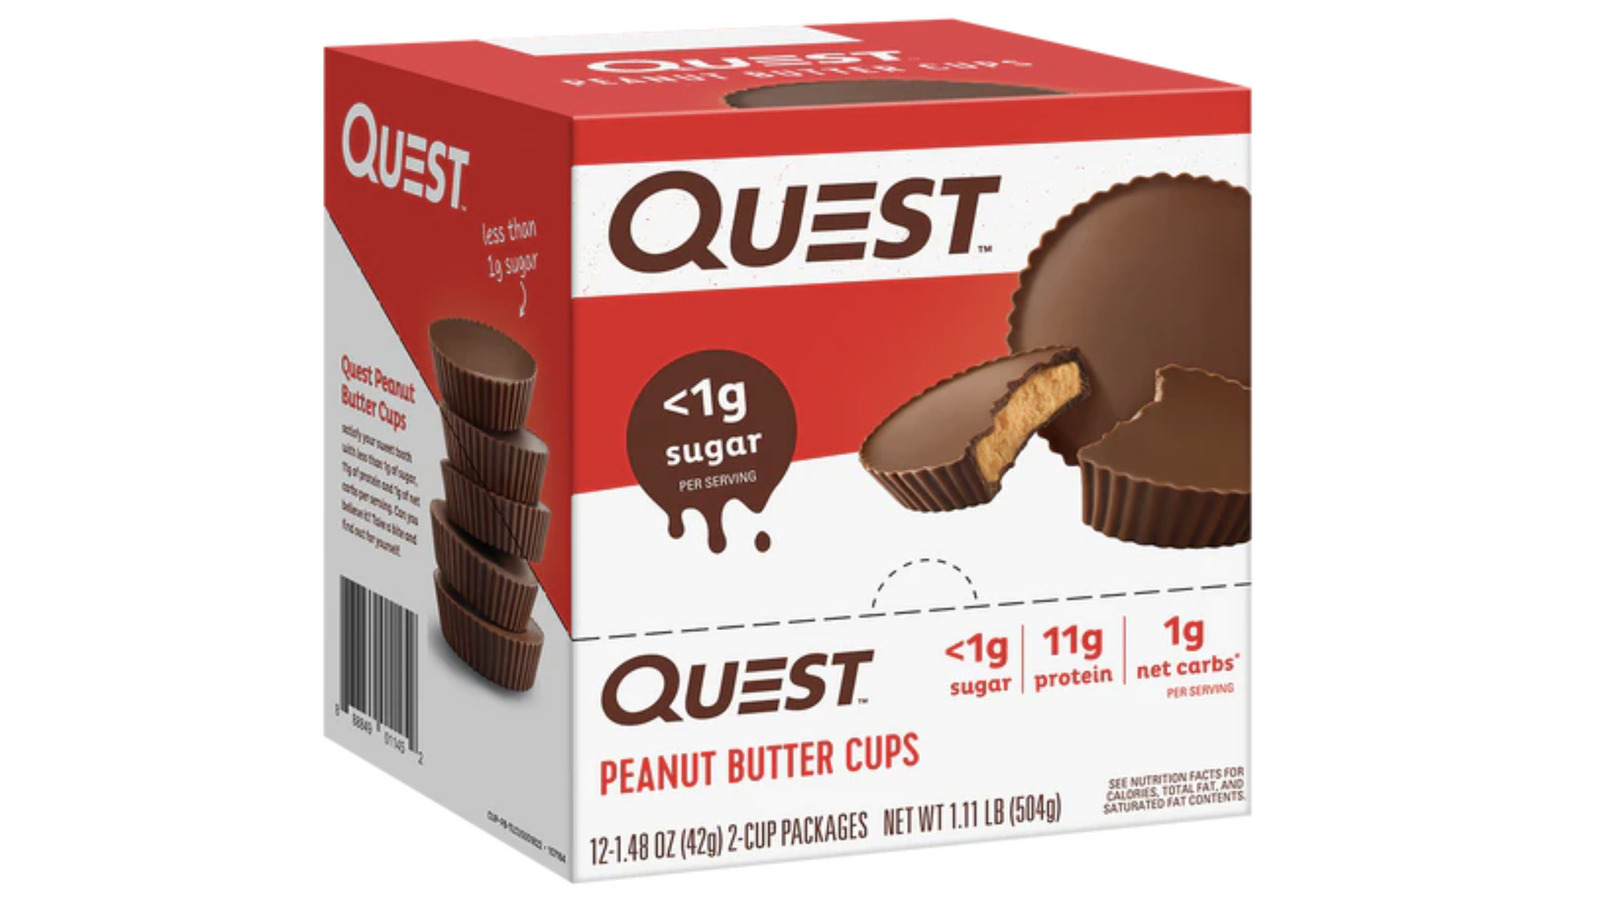 Are Quest Peanut Butter Cups Actually Healthy? - Health Digest